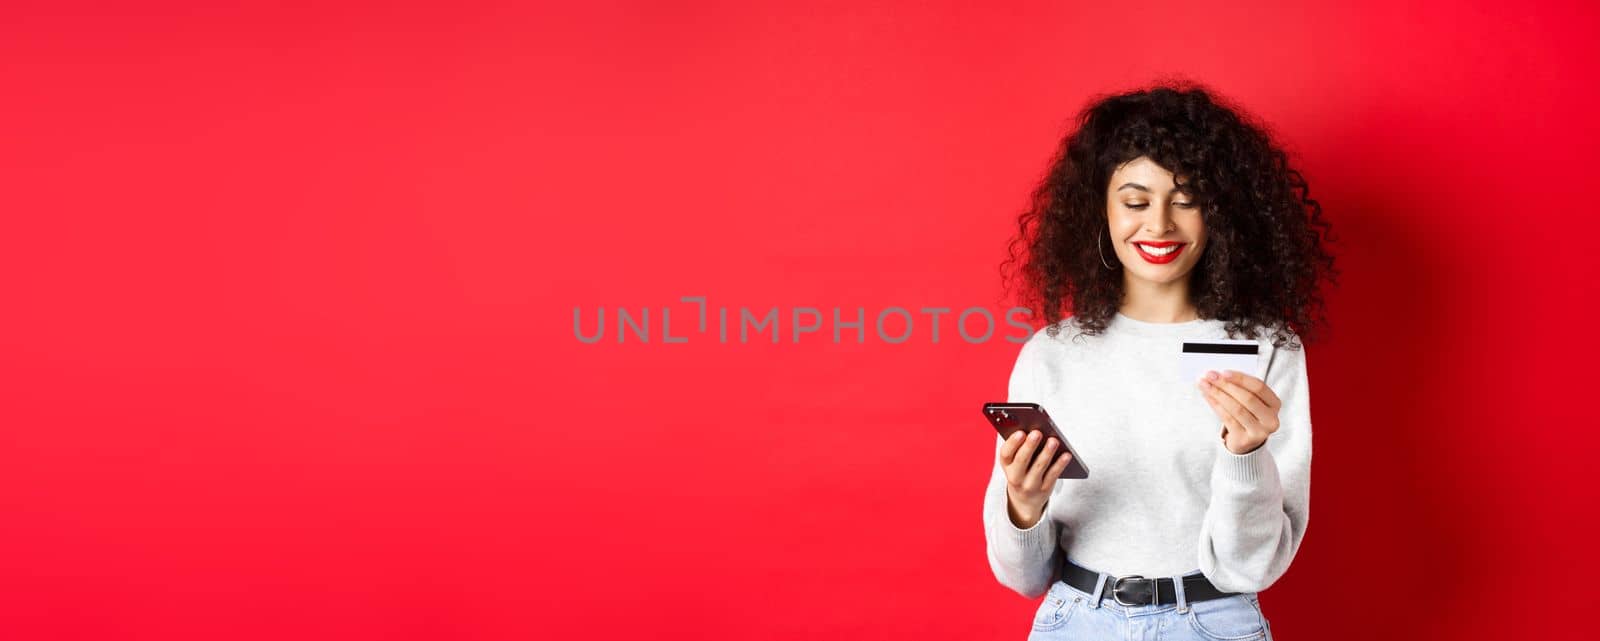 E-commerce and online shopping concept. Young modern woman paying with credit card, making purchase with smartphone, standing on red background.